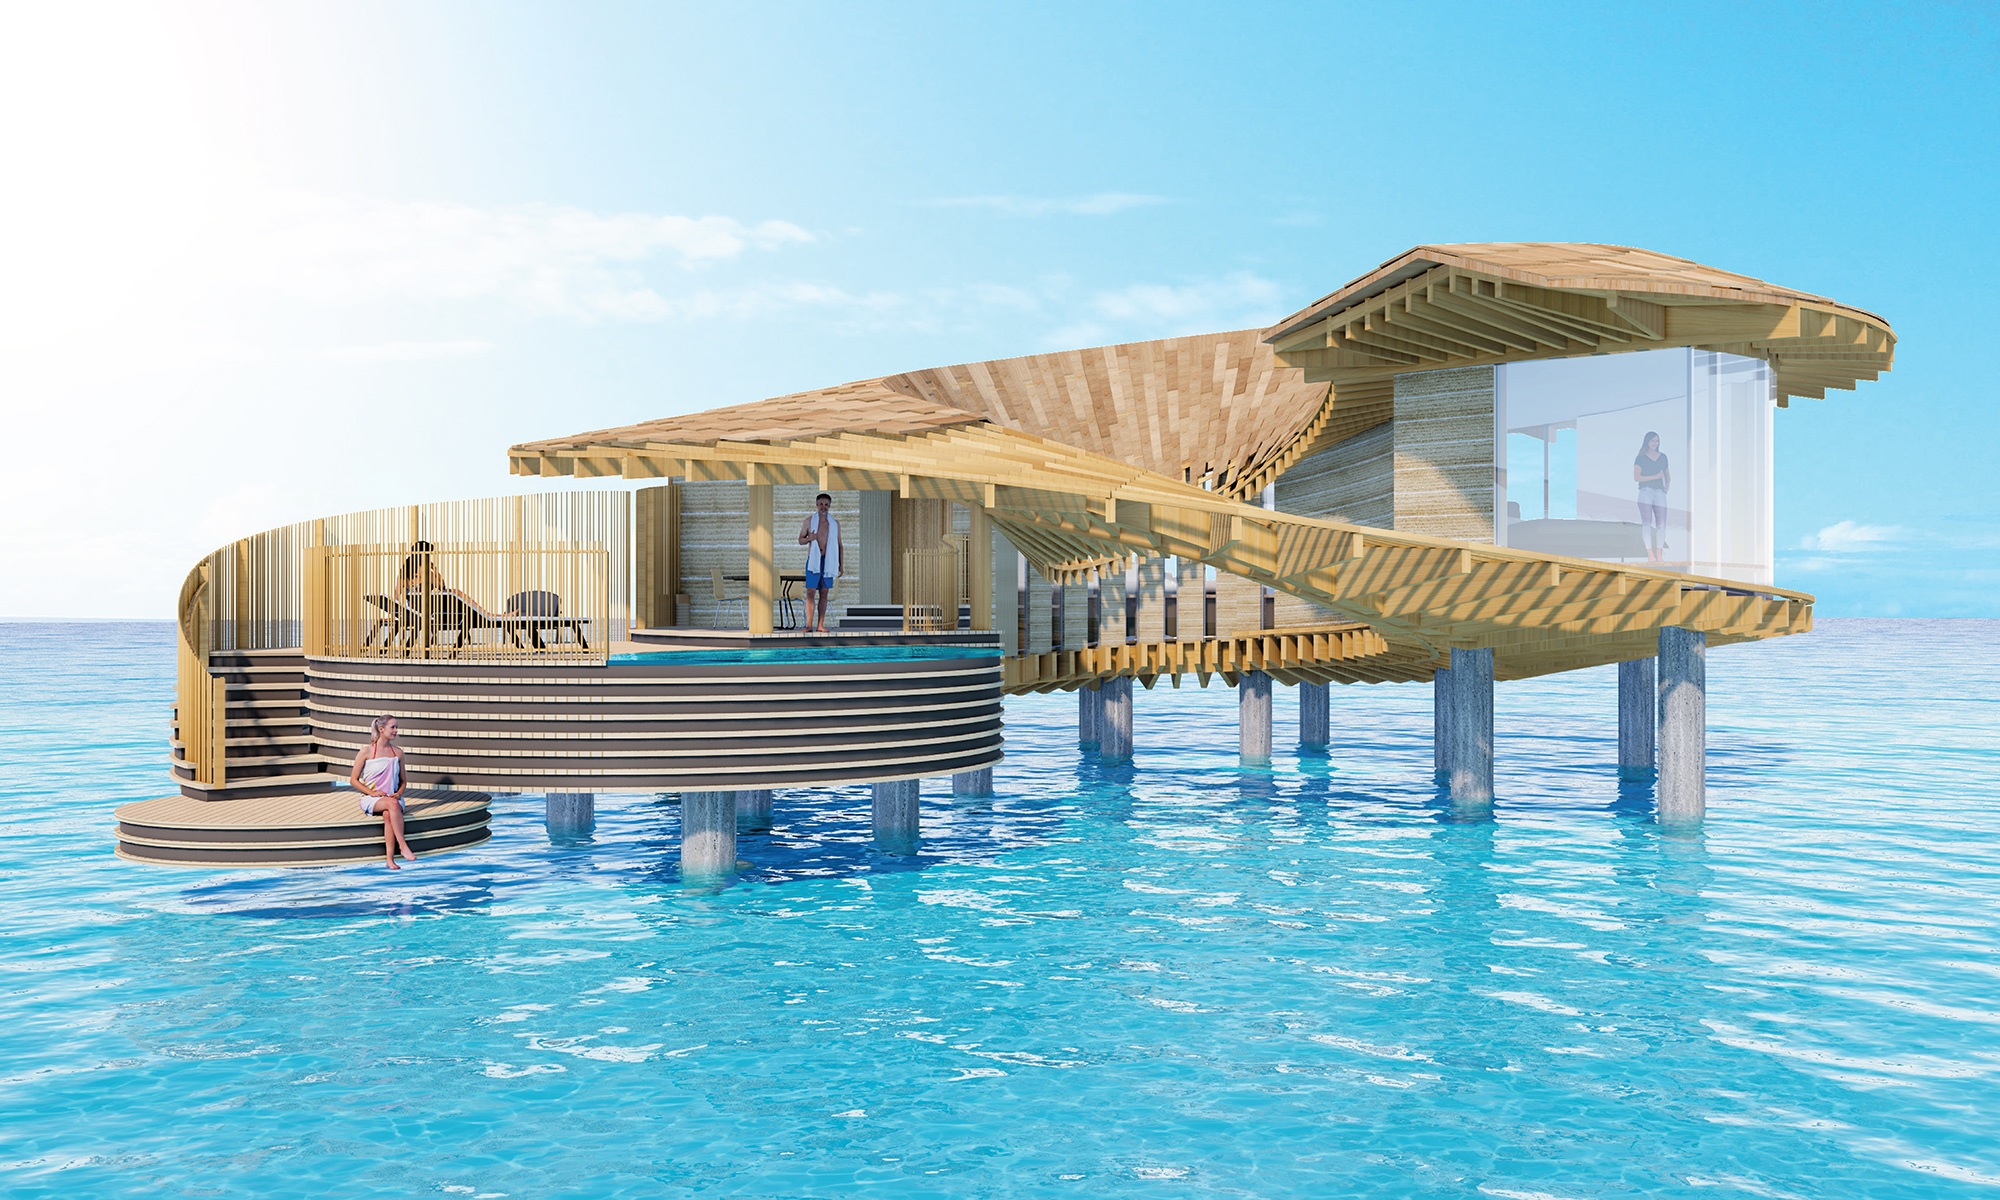 Coral Villa of the hotel complex Ummahat Island Resort in the Red Sea, designed by Japanese architect Kengo Kuma